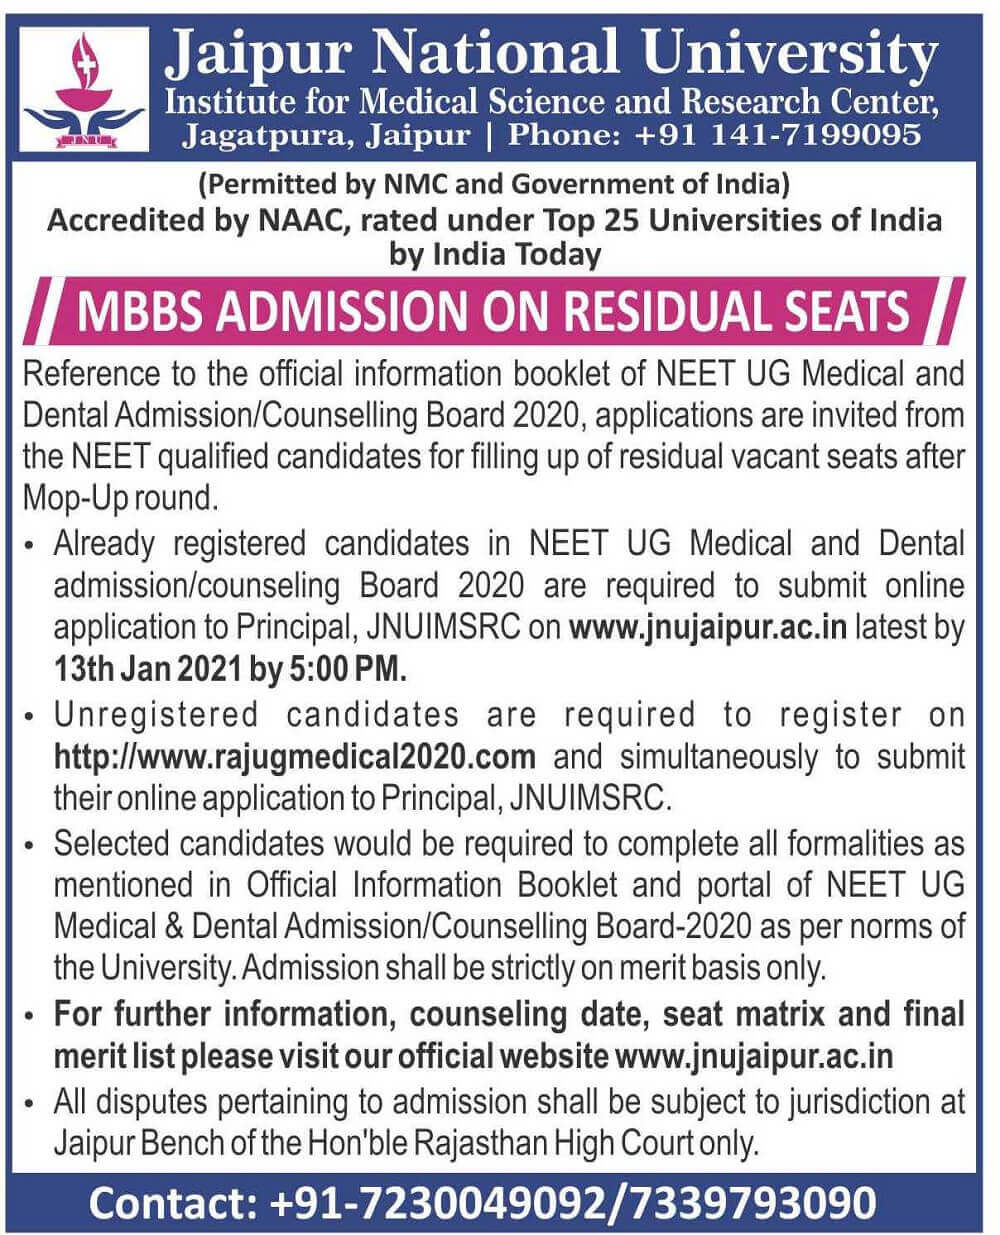 Admission in MBBS Programmes	